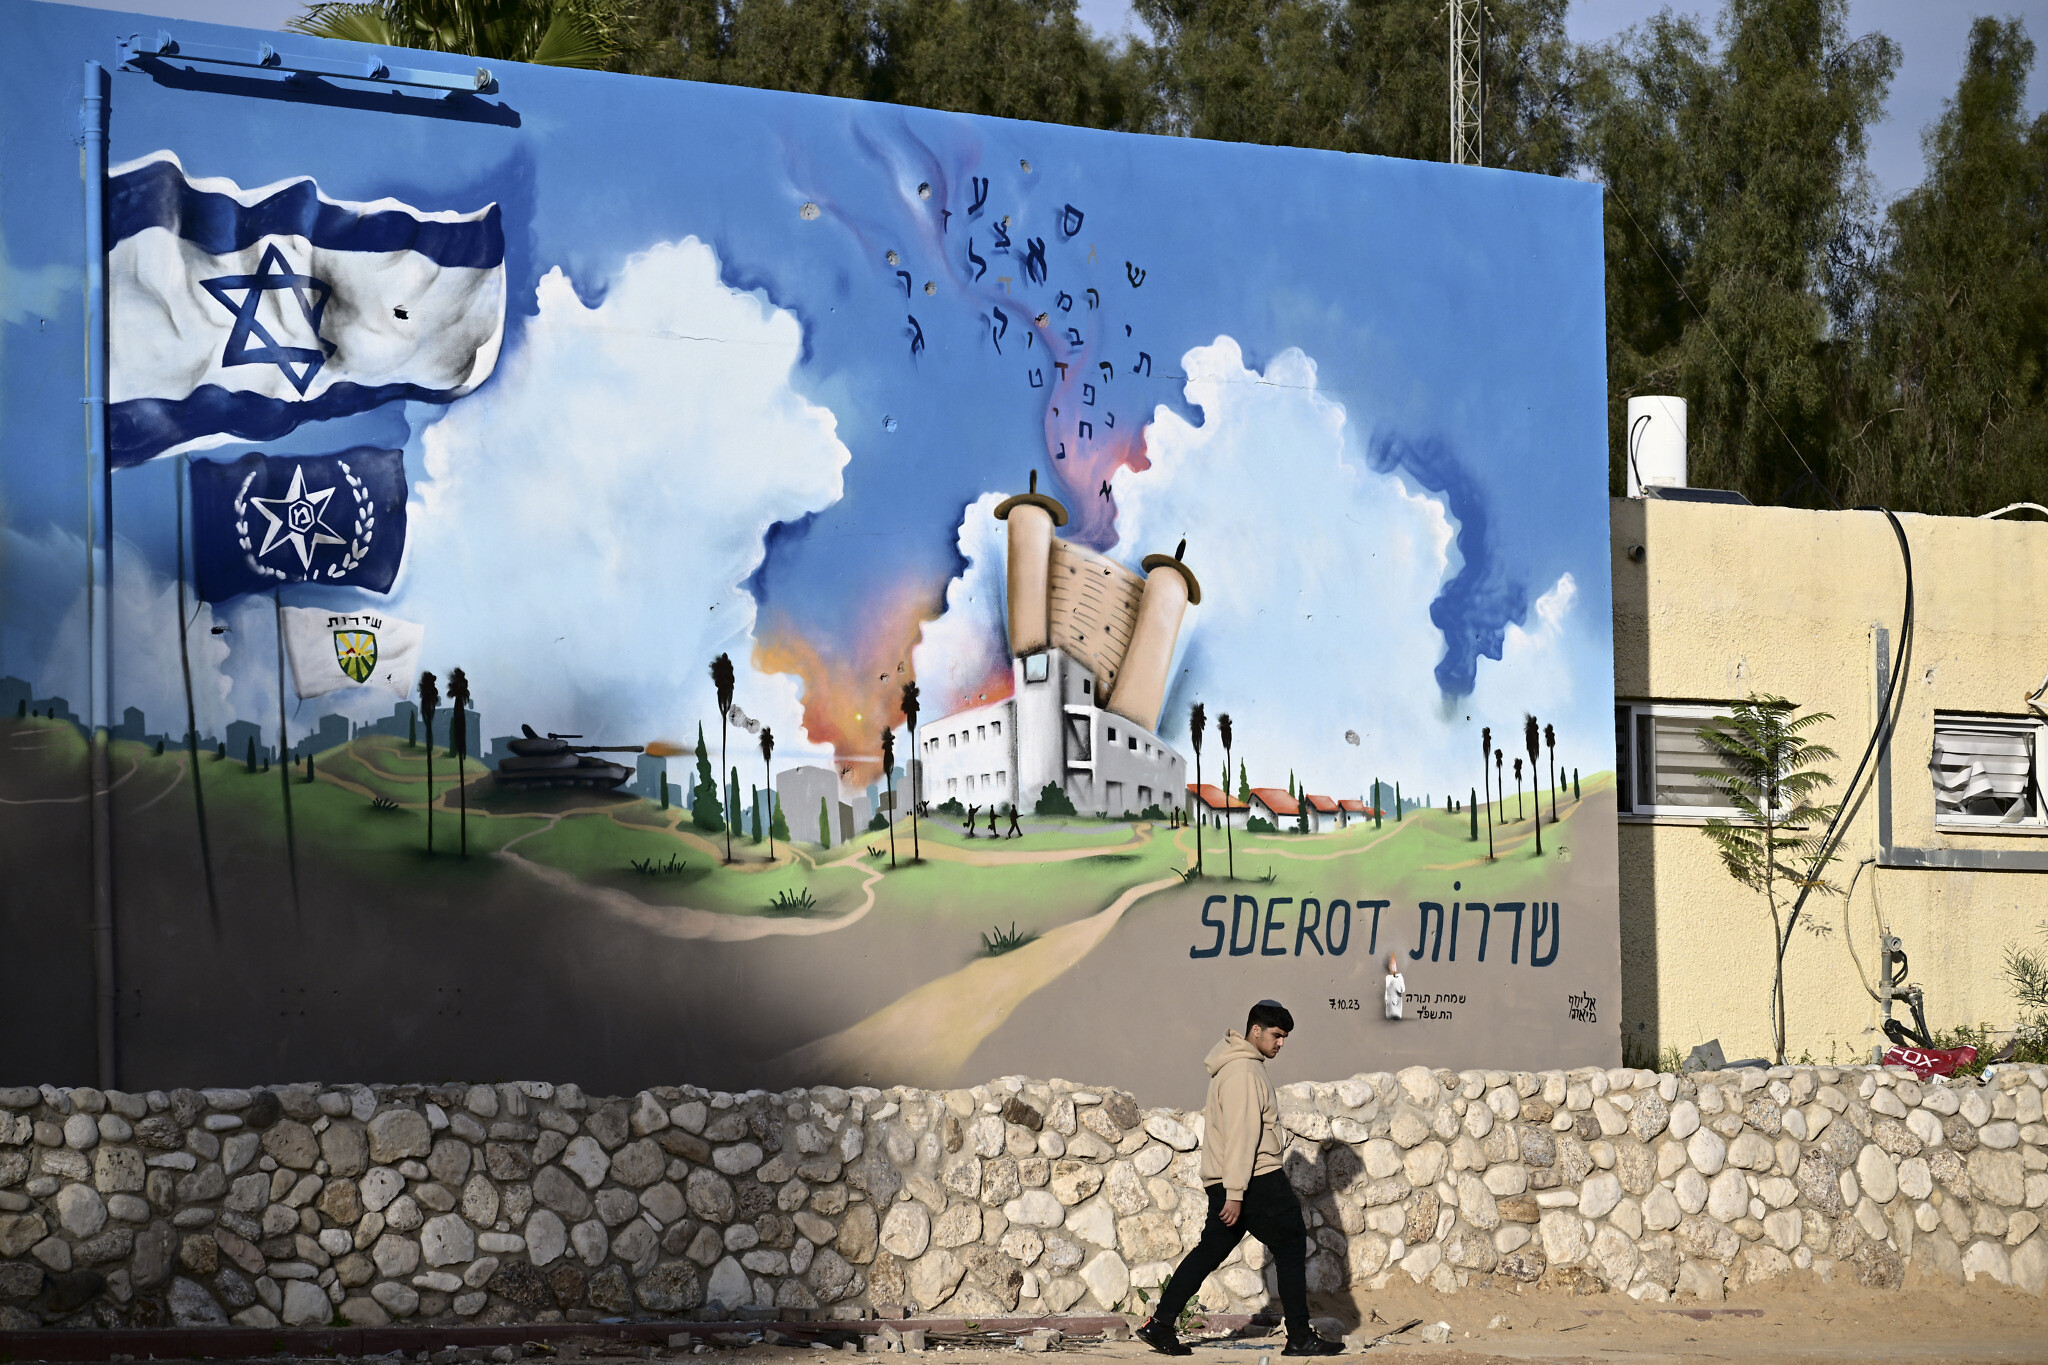 Sderot schools to reopen March 3 as some come back south